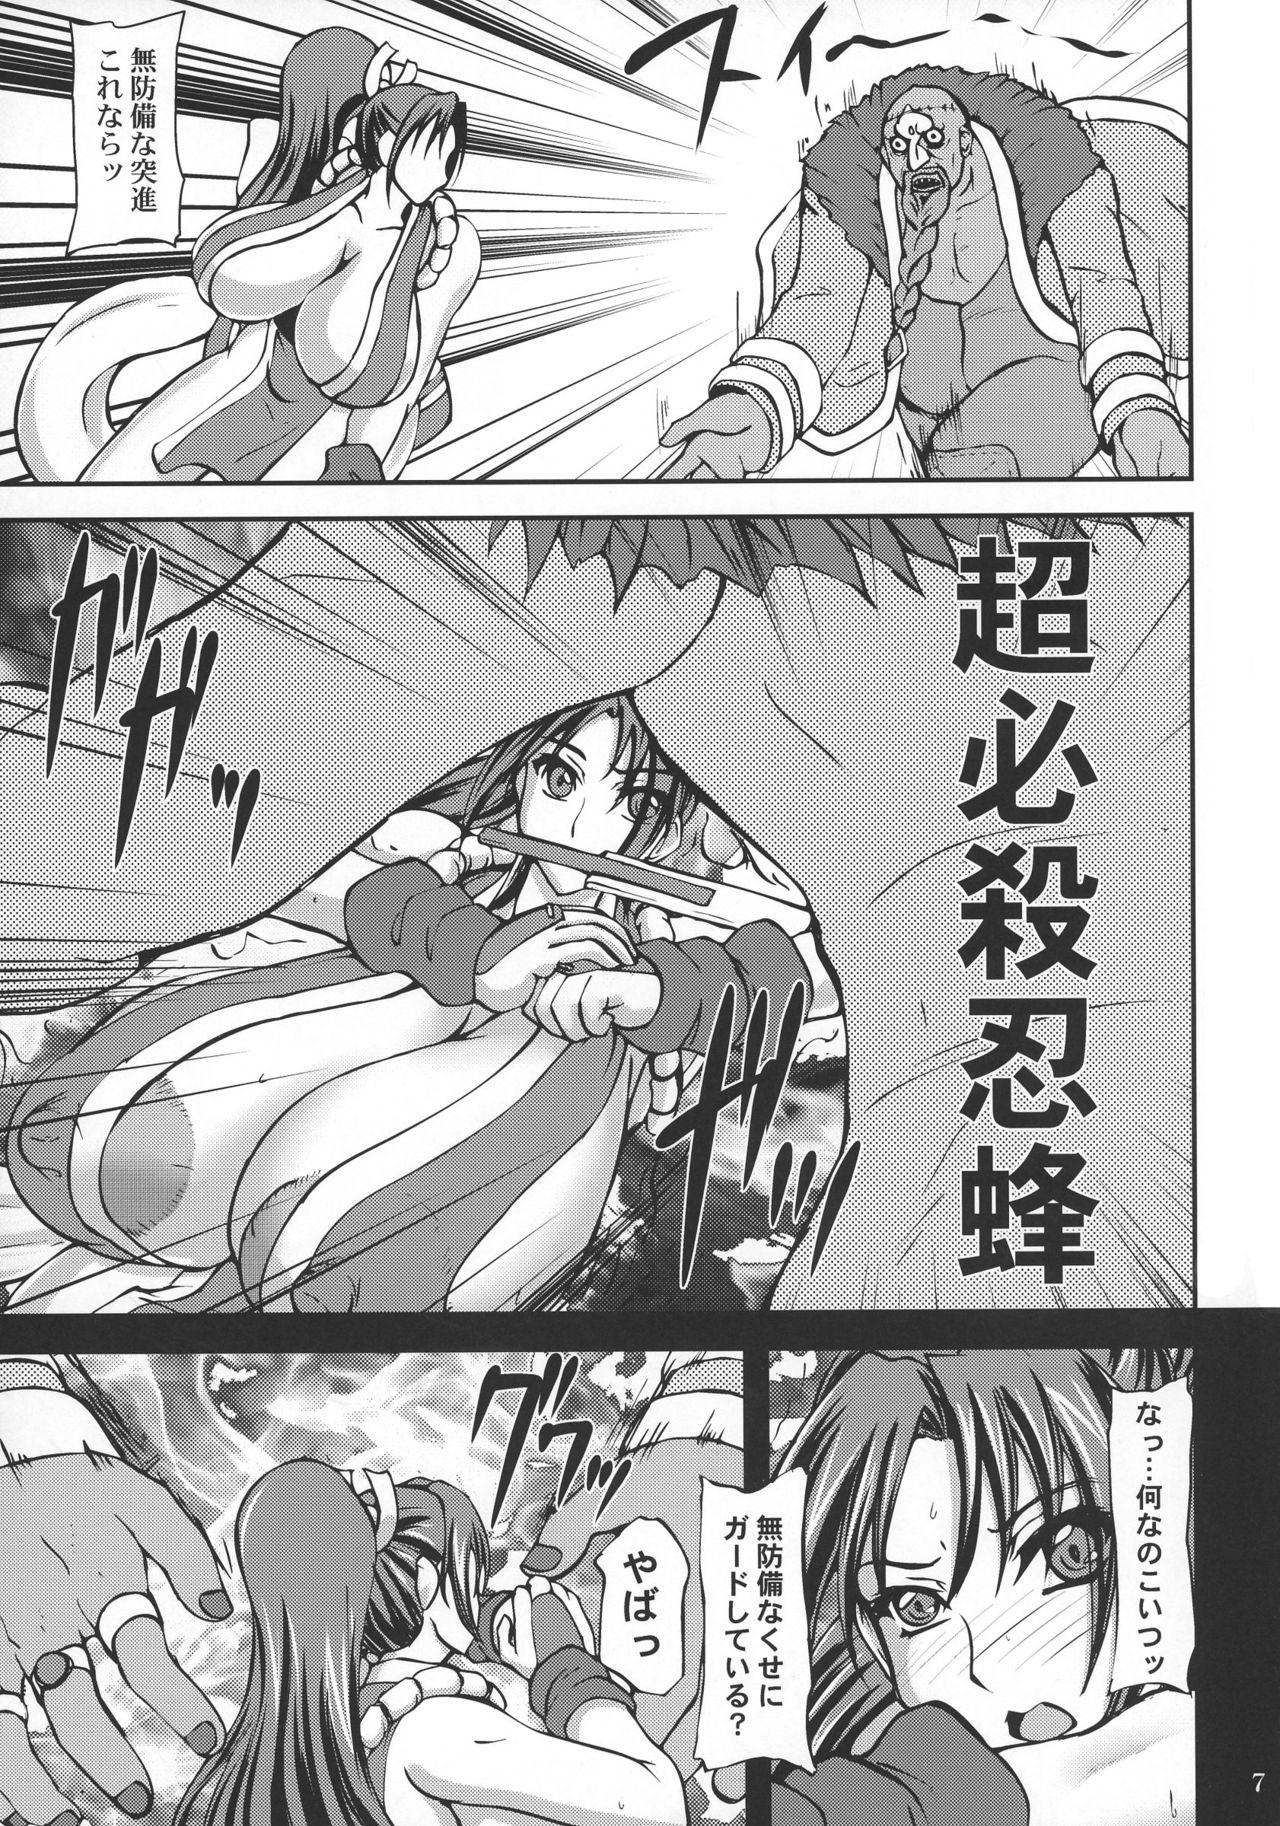 Leche 14 - King of fighters Caiu Na Net - Page 7